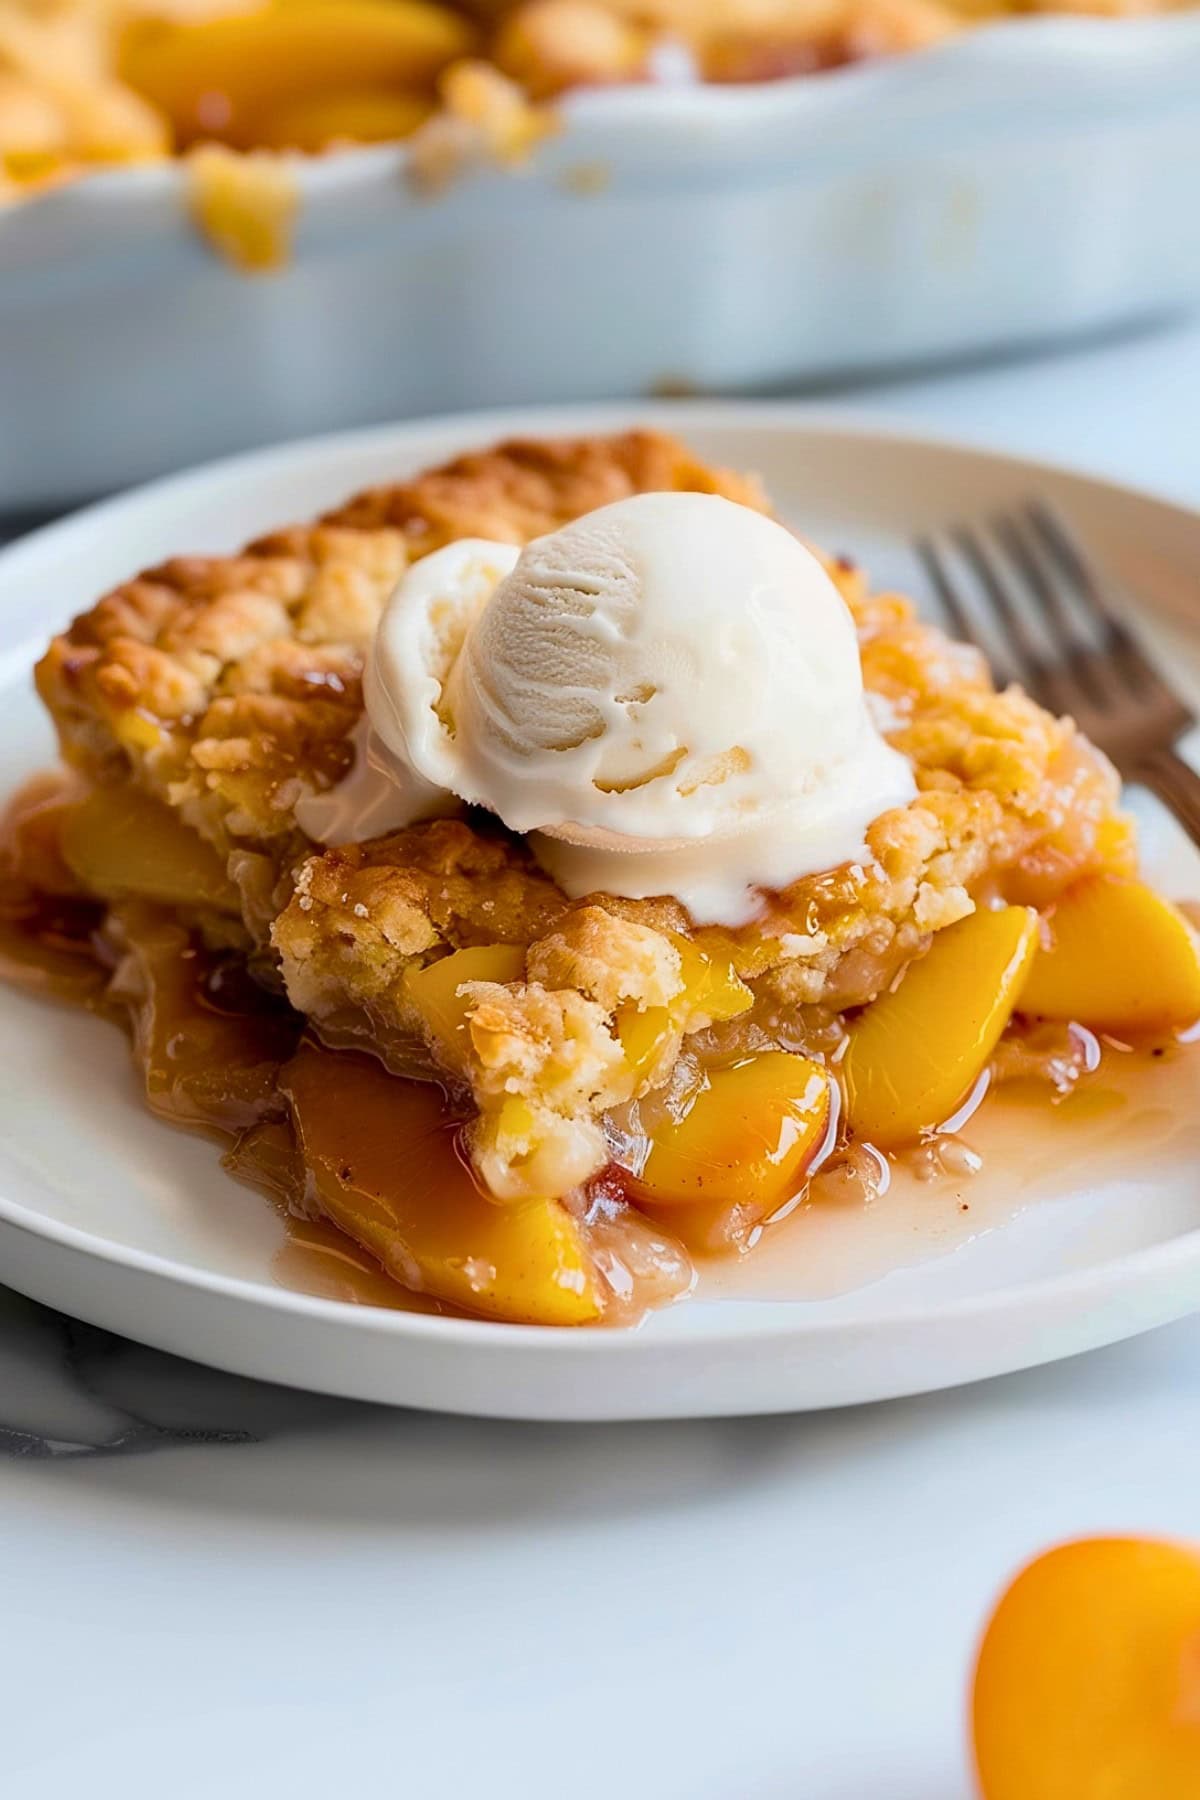 Slice of Peach Cobbler with Cake Mix on a Plate with Vanilla Ice Cream and a Fork